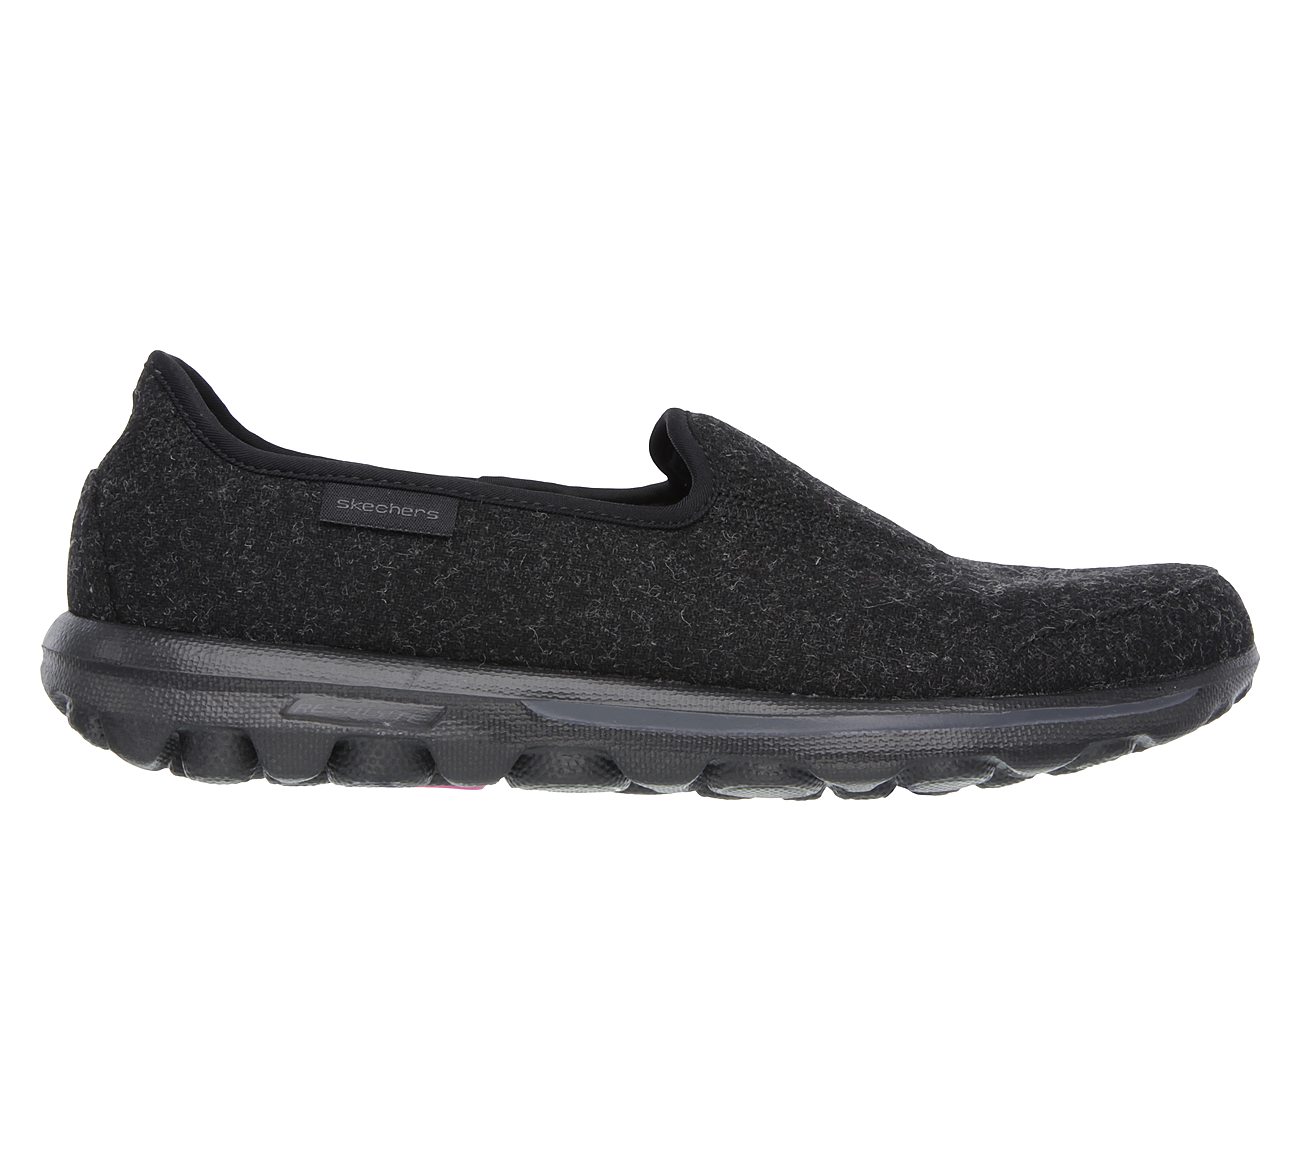 skechers sockless shoes